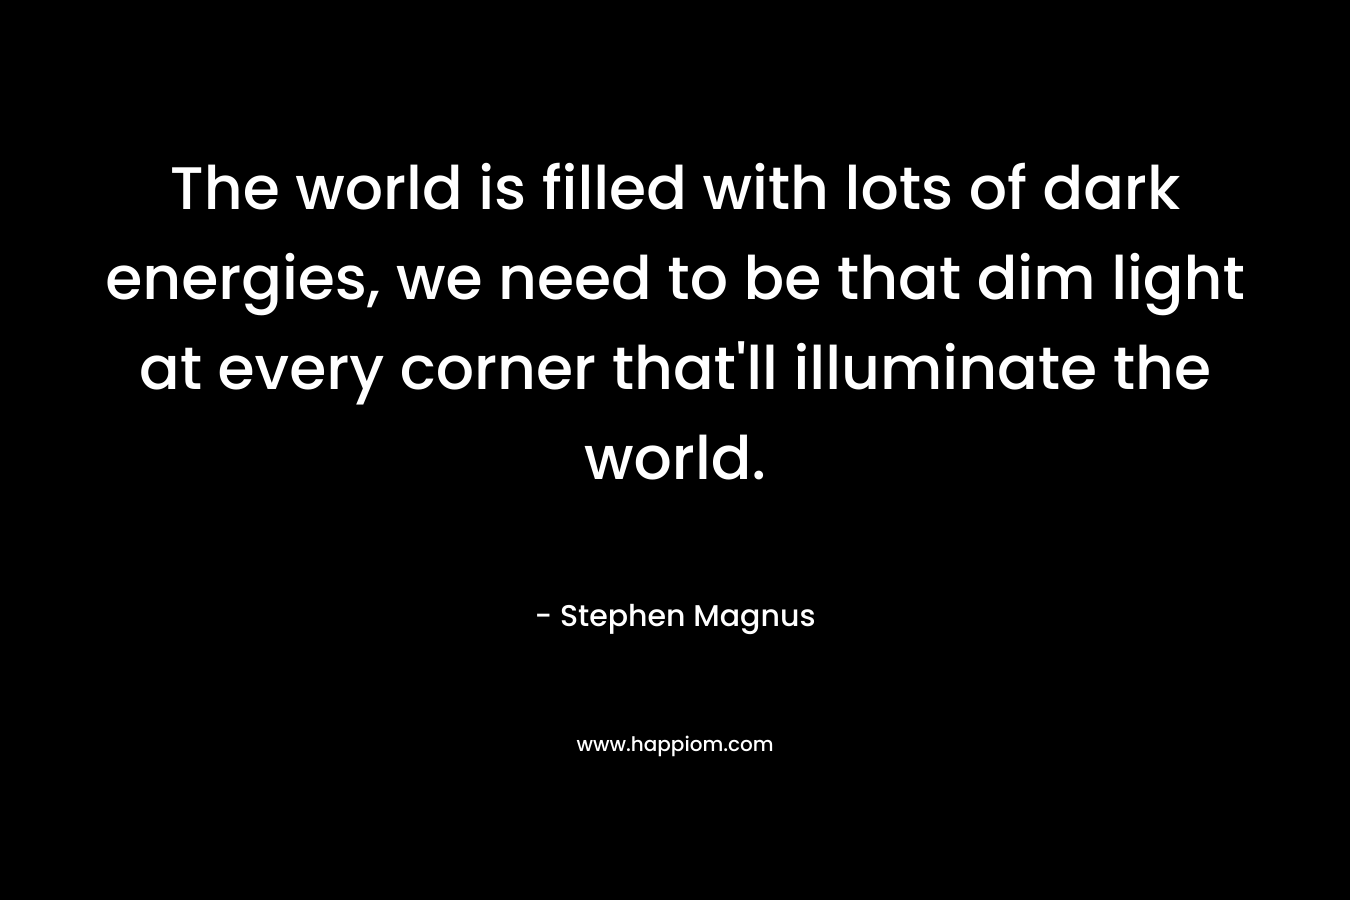 The world is filled with lots of dark energies, we need to be that dim light at every corner that’ll illuminate the world. – Stephen Magnus